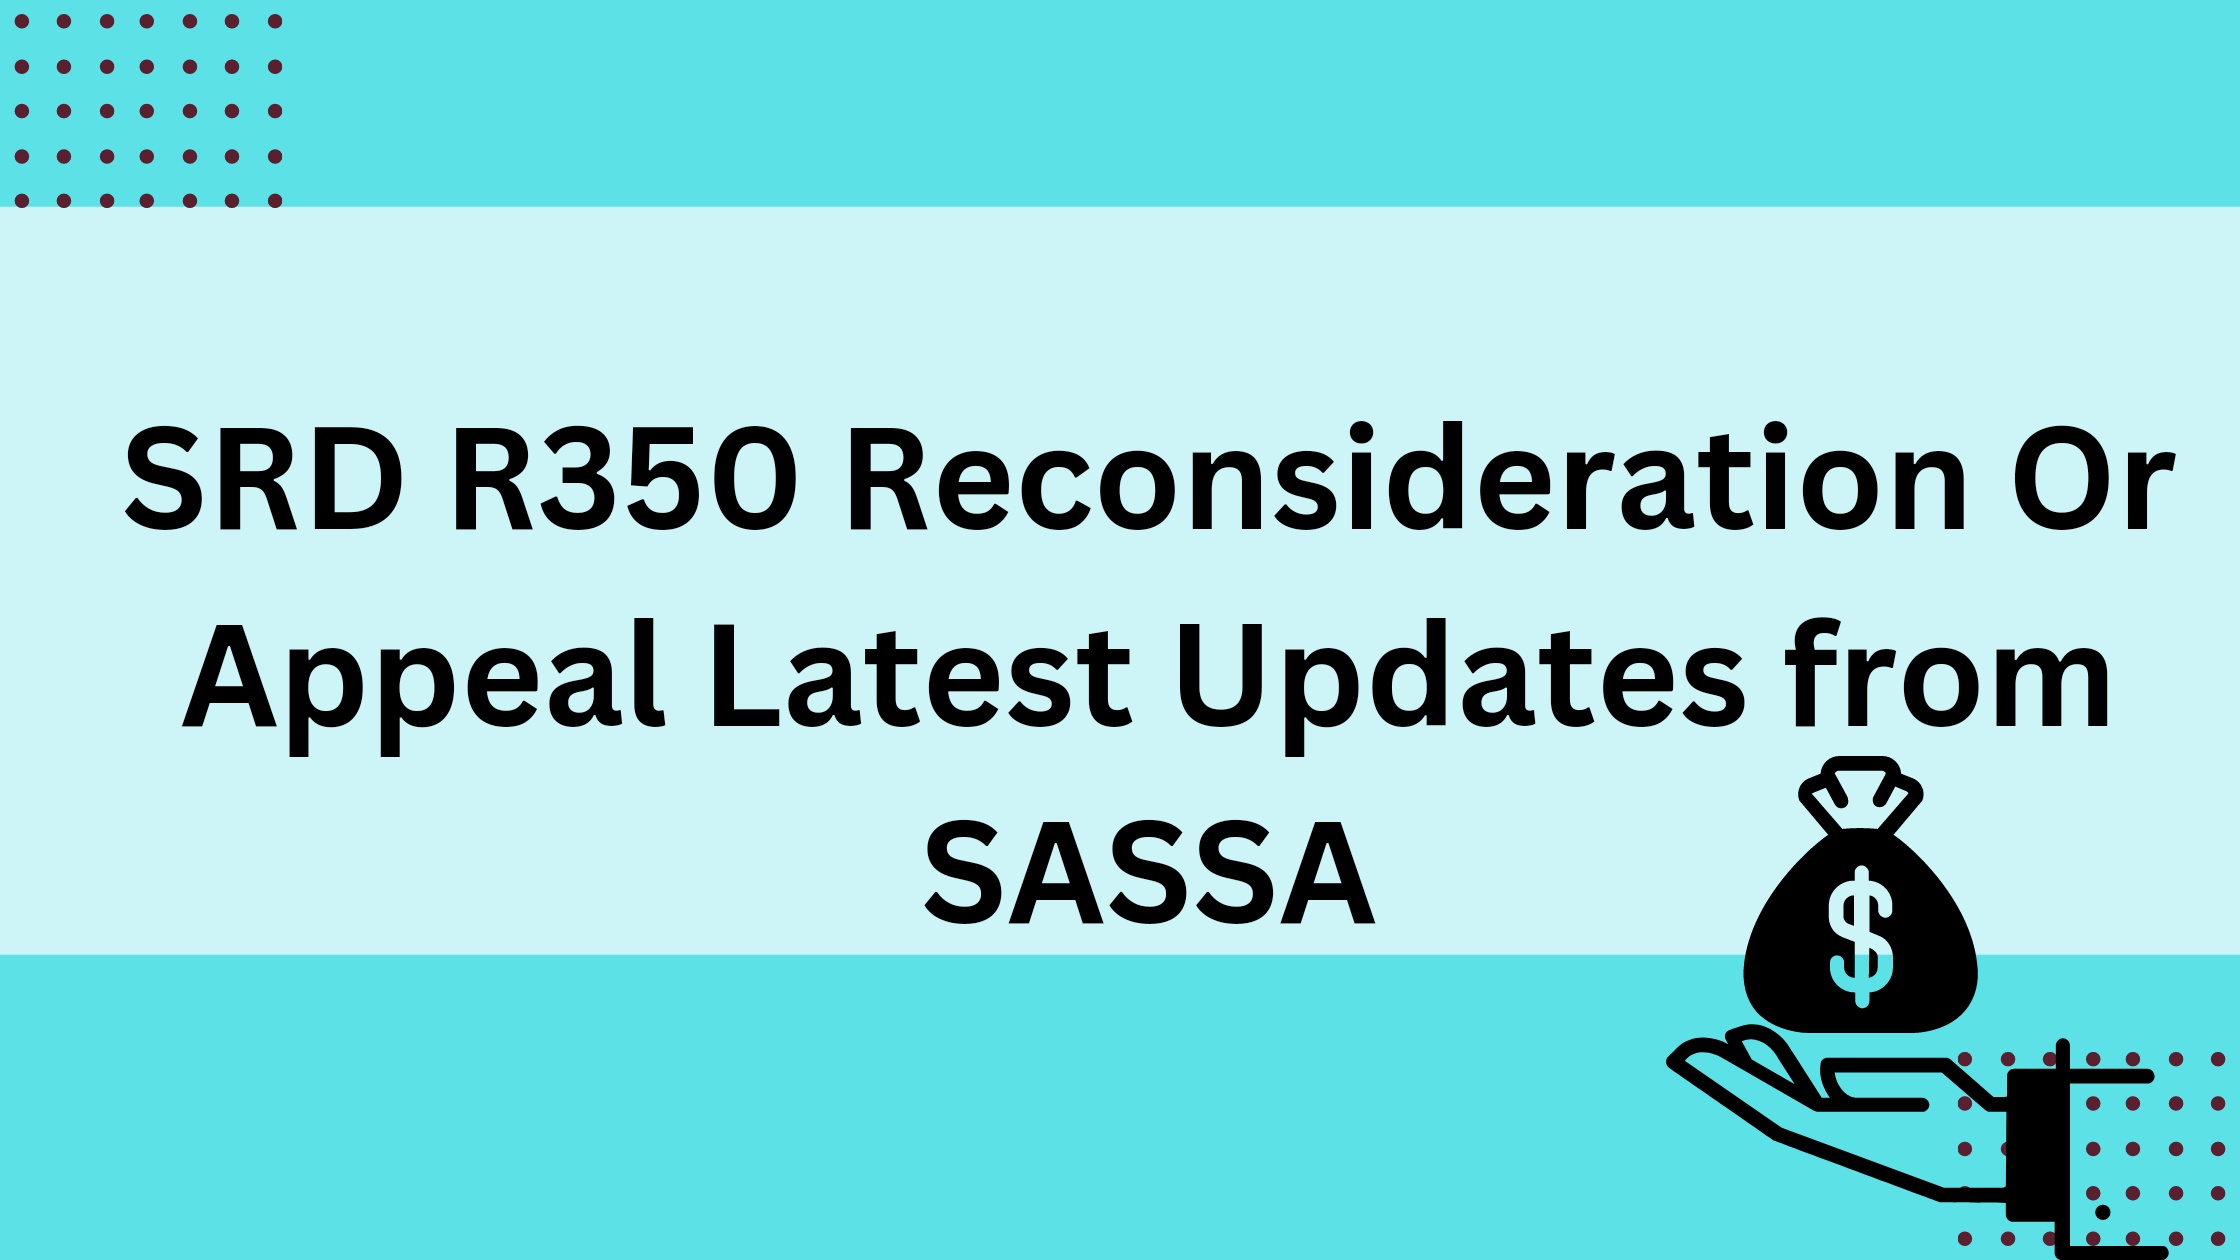 SRD R350 Reconsideration Or Appeal Latest Updates from SASSA